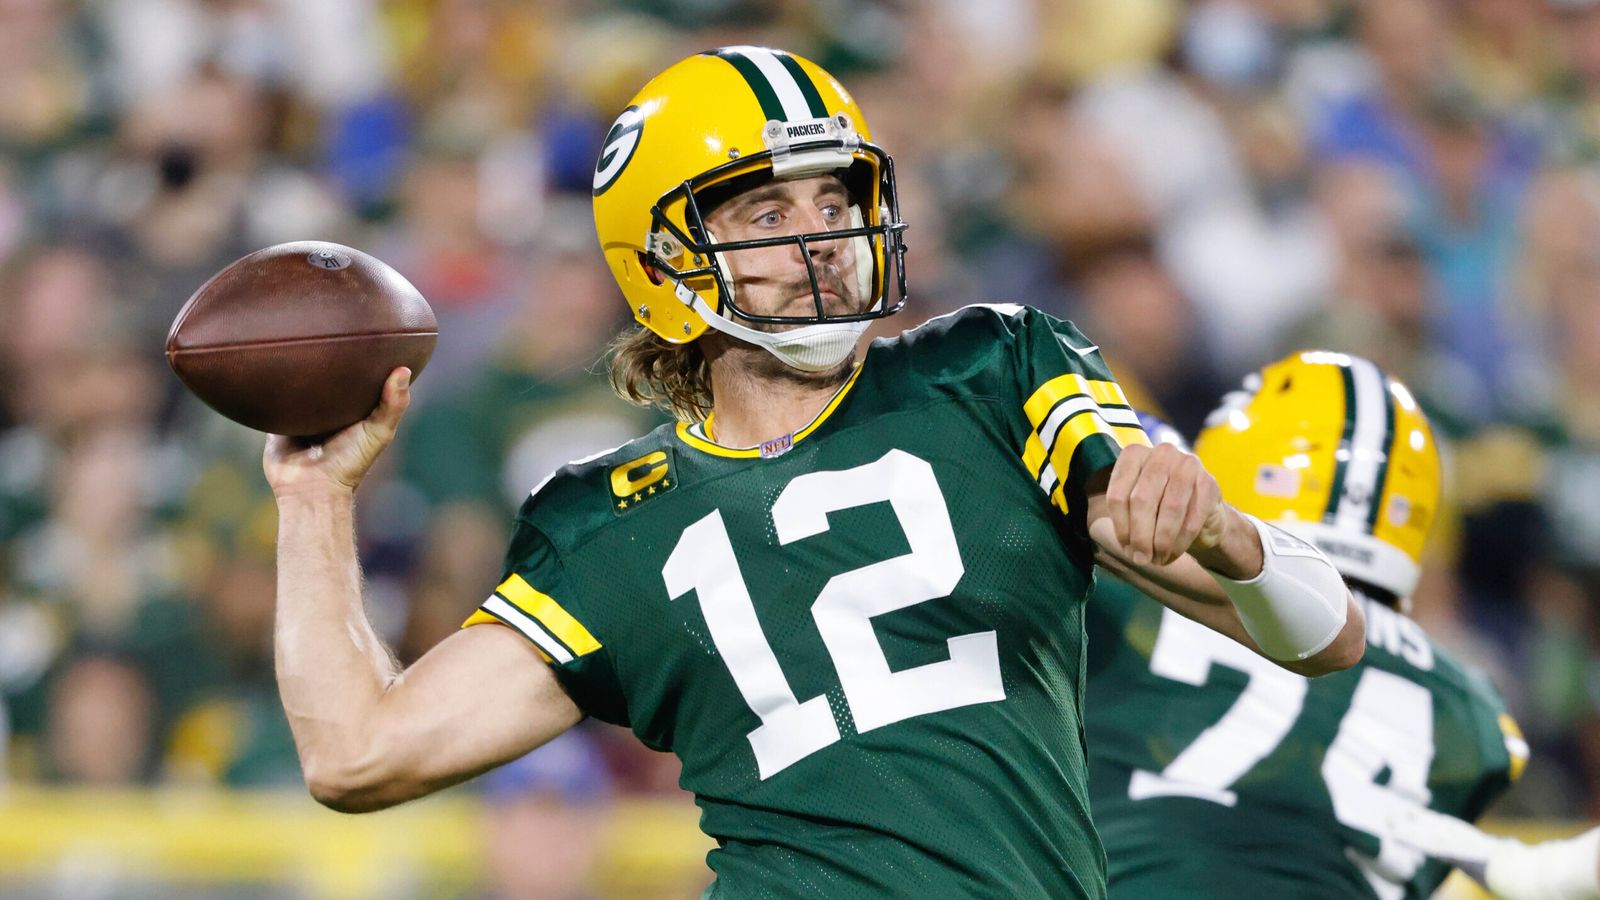 NFL Week Two Stats: Aaron Rodgers throws 450th TD pass, NFL comebacks galore and Indianapolis Colts still can’t win in Jacksonville